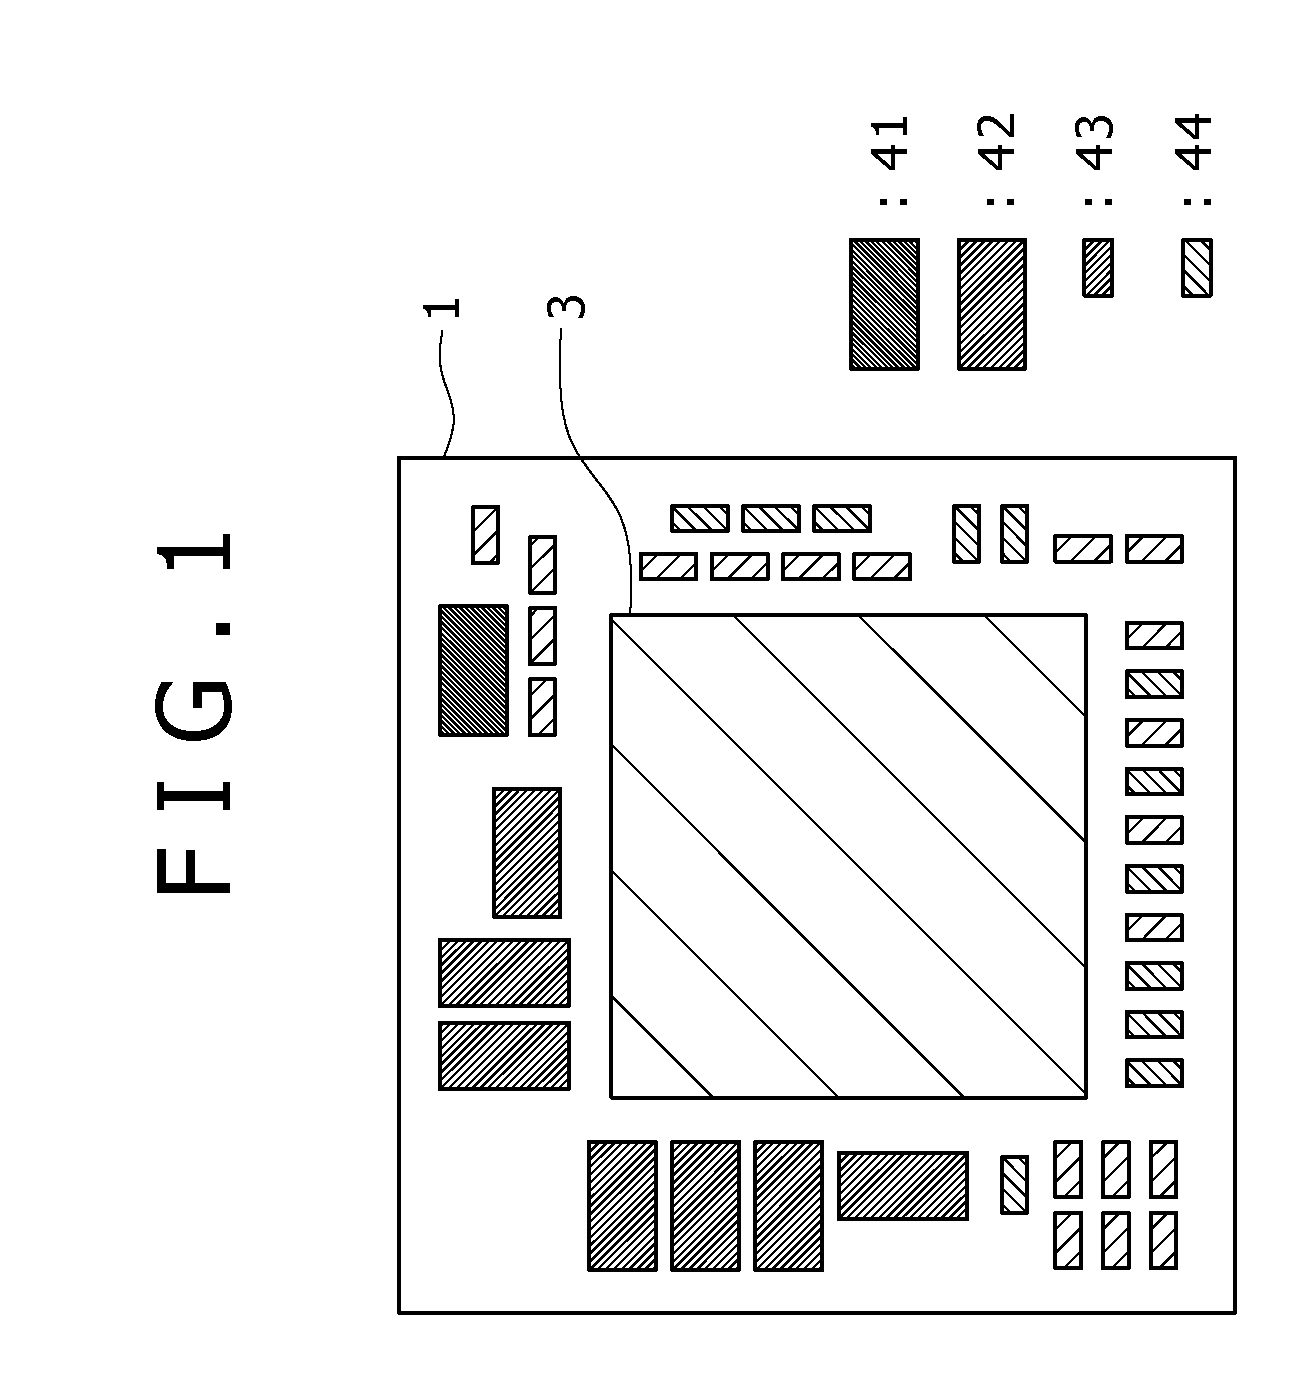 Inductor module, silicon tuner module and semiconductor device